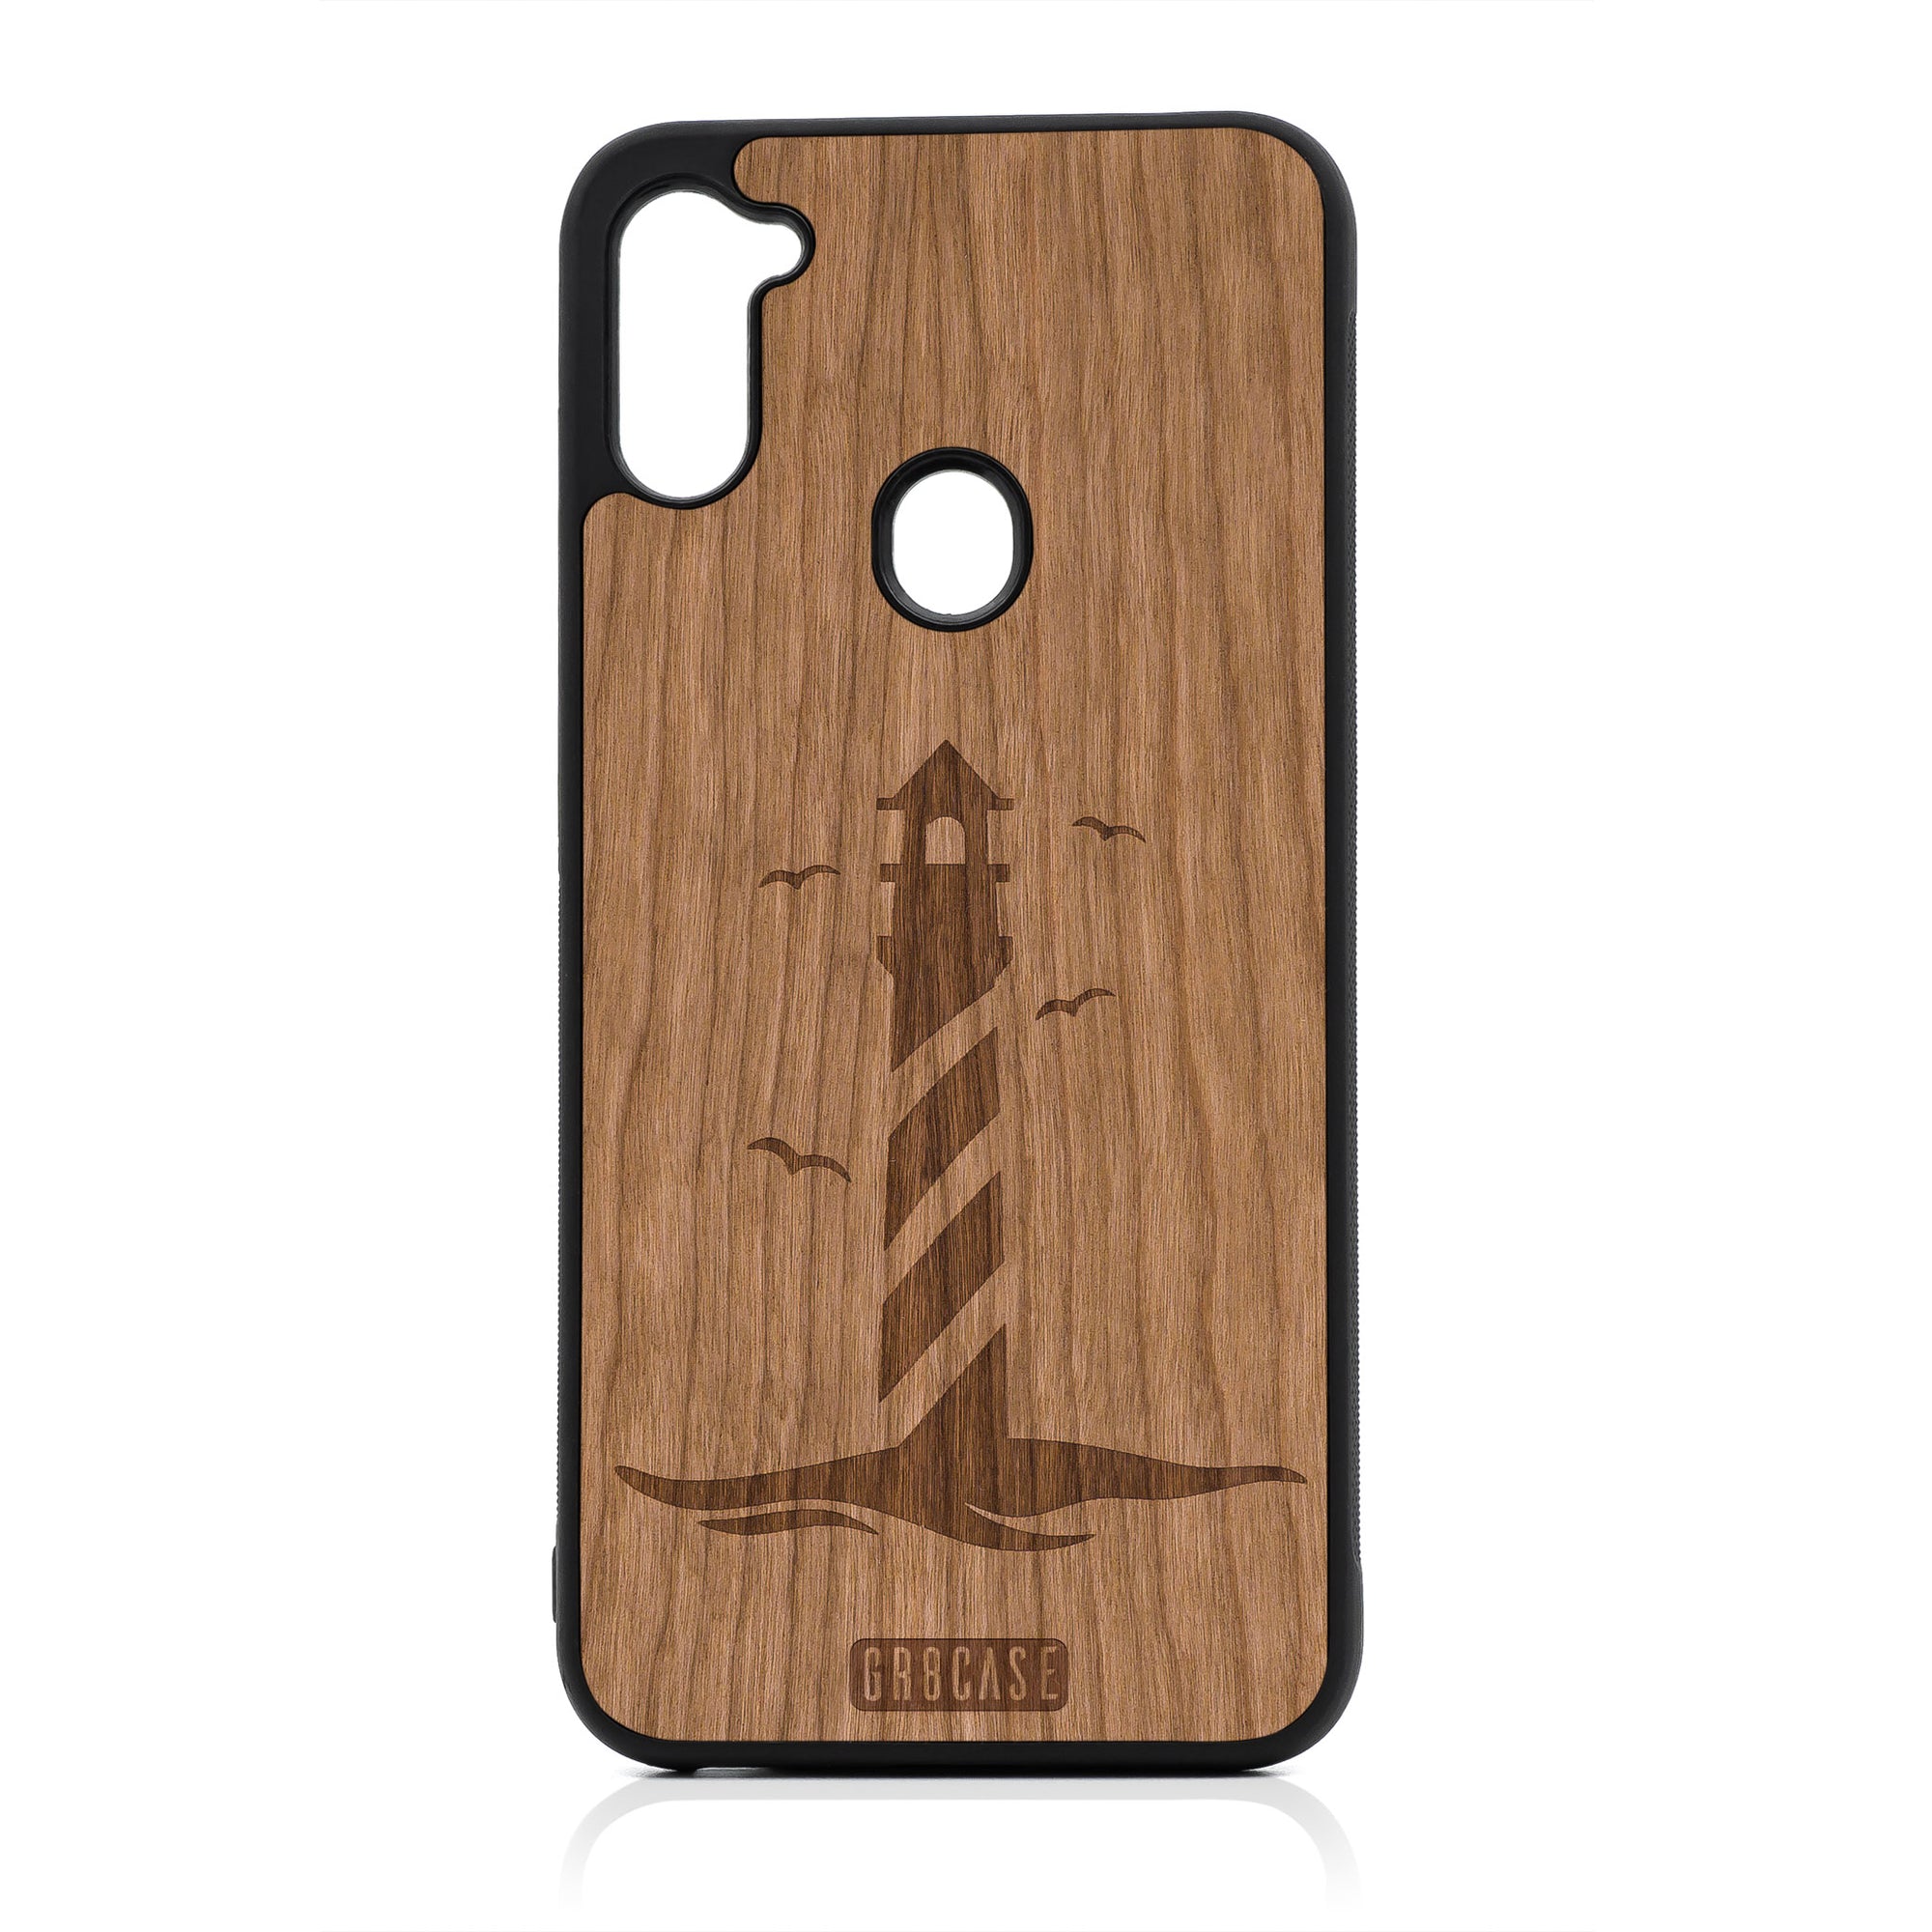 Lighthouse Design Wood Case For Samsung Galaxy A11